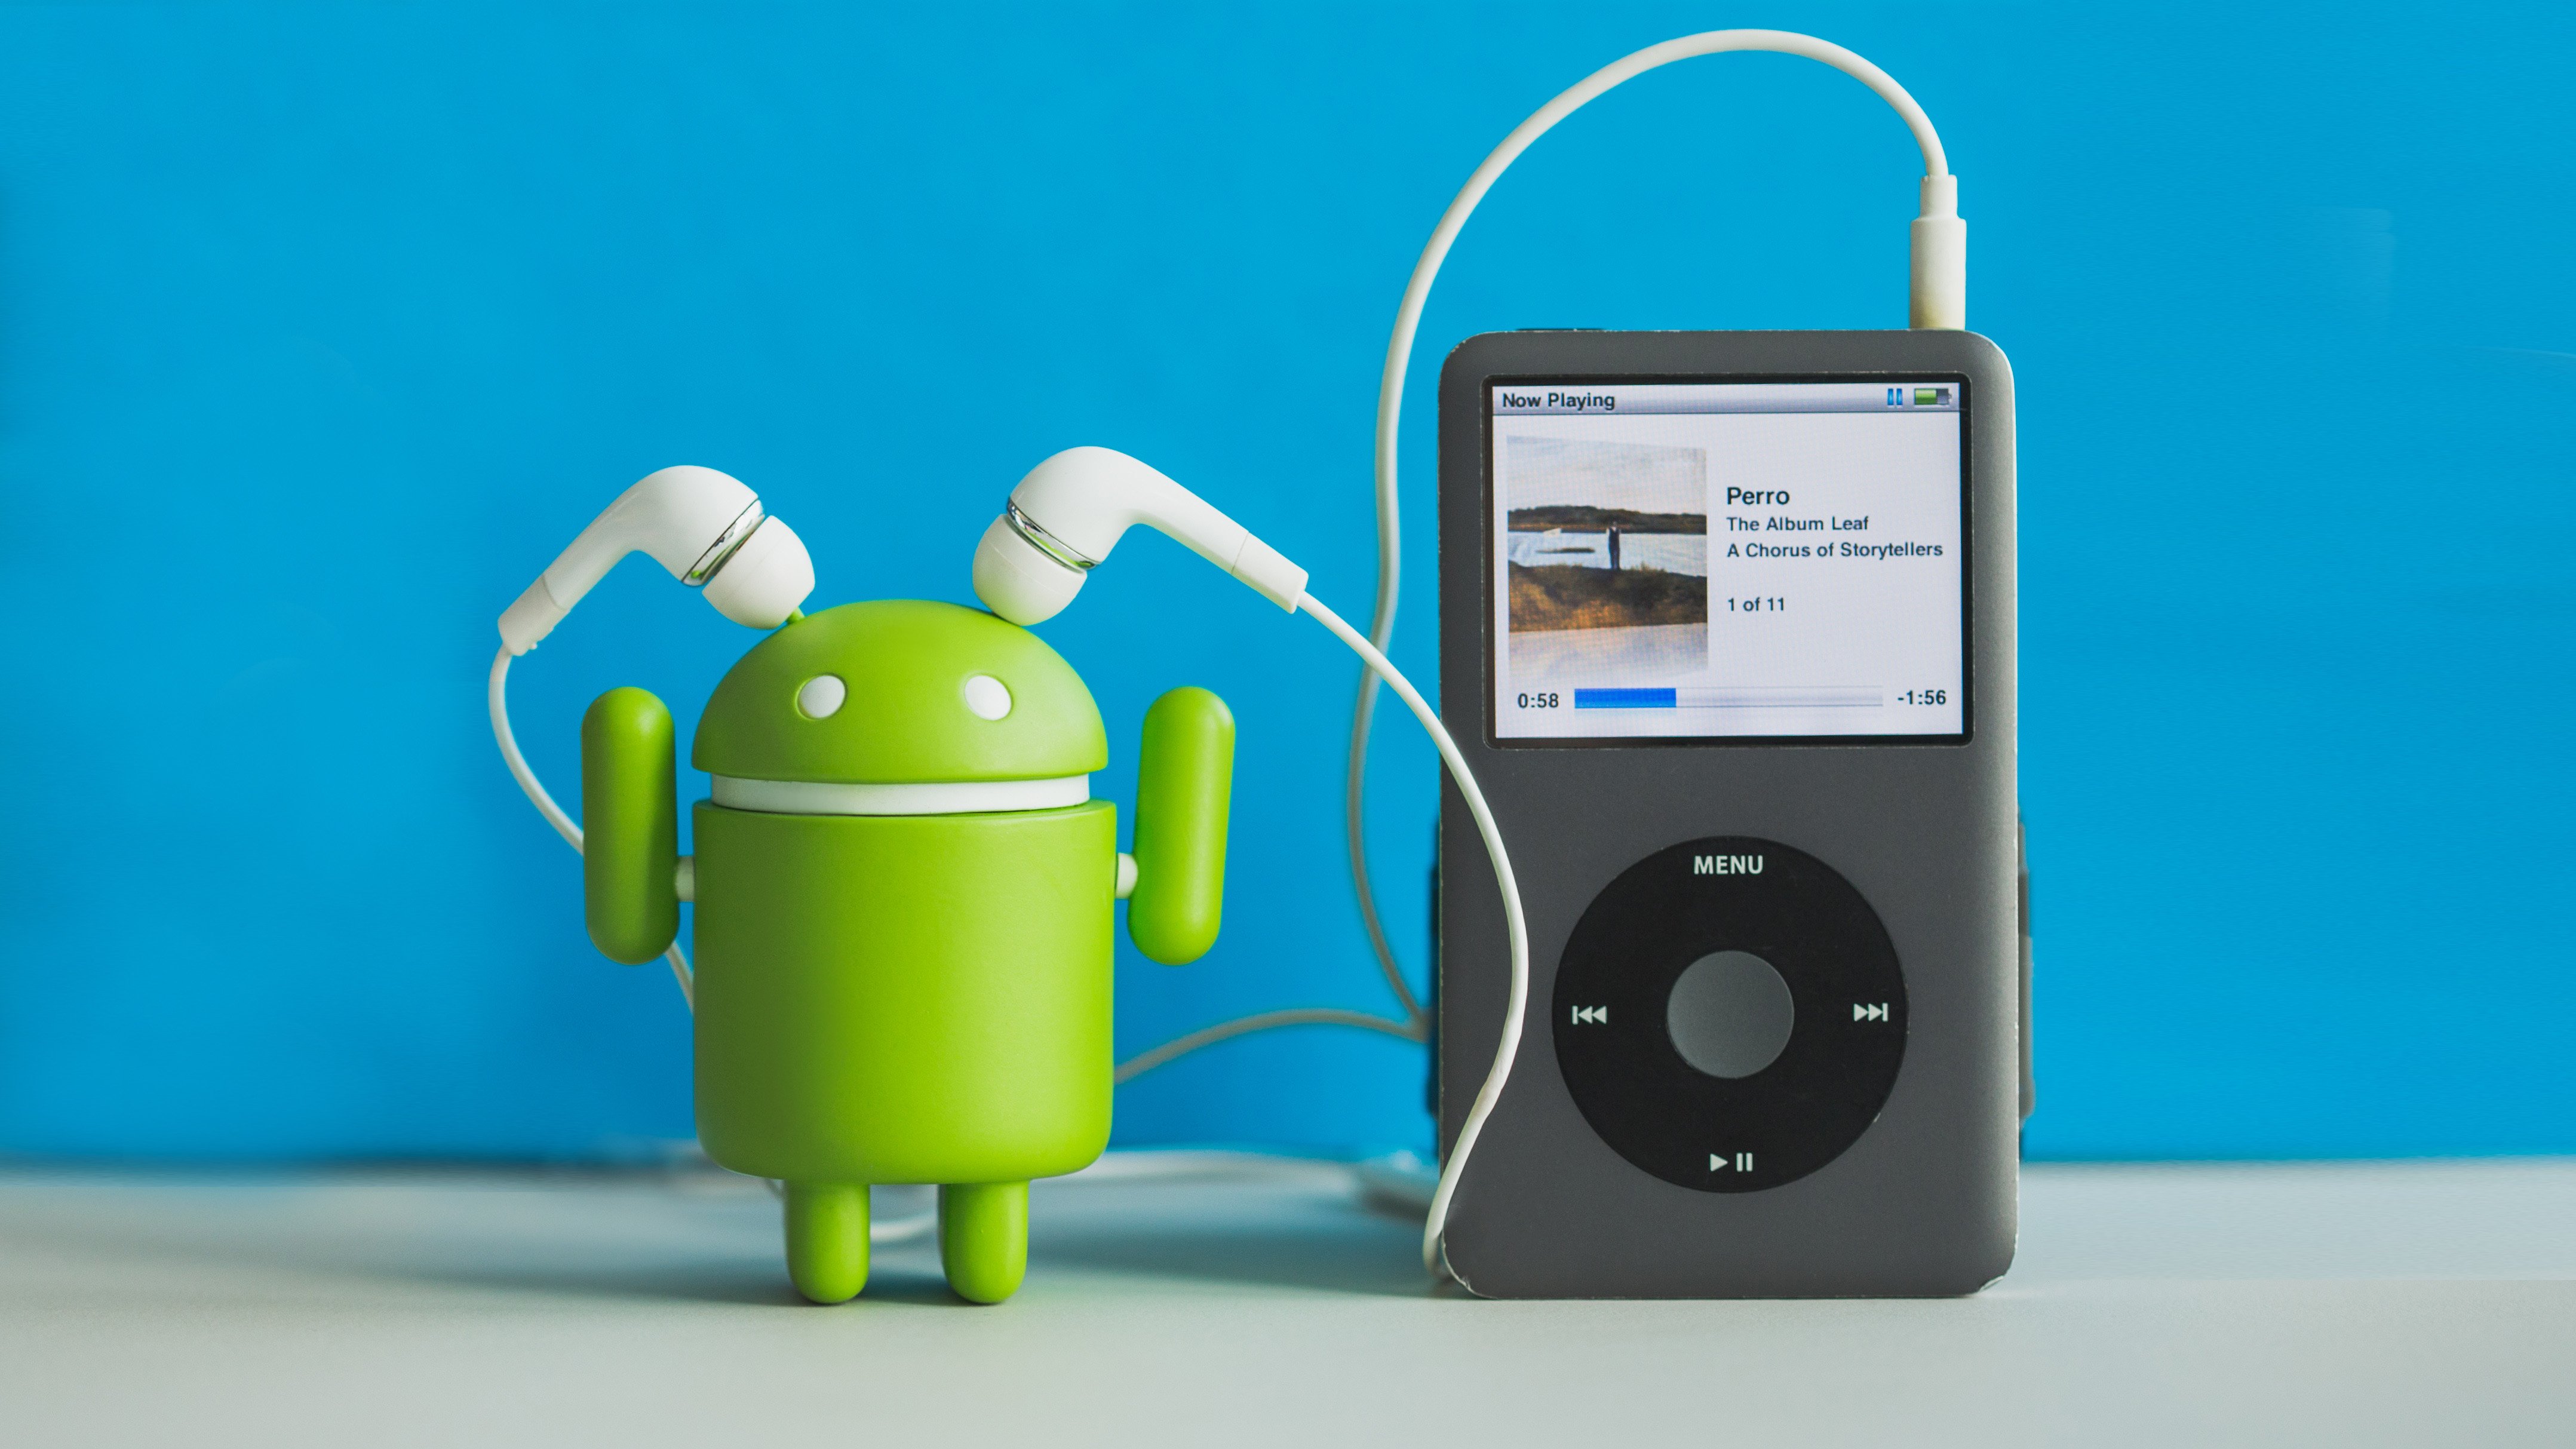 itunes for android phone free